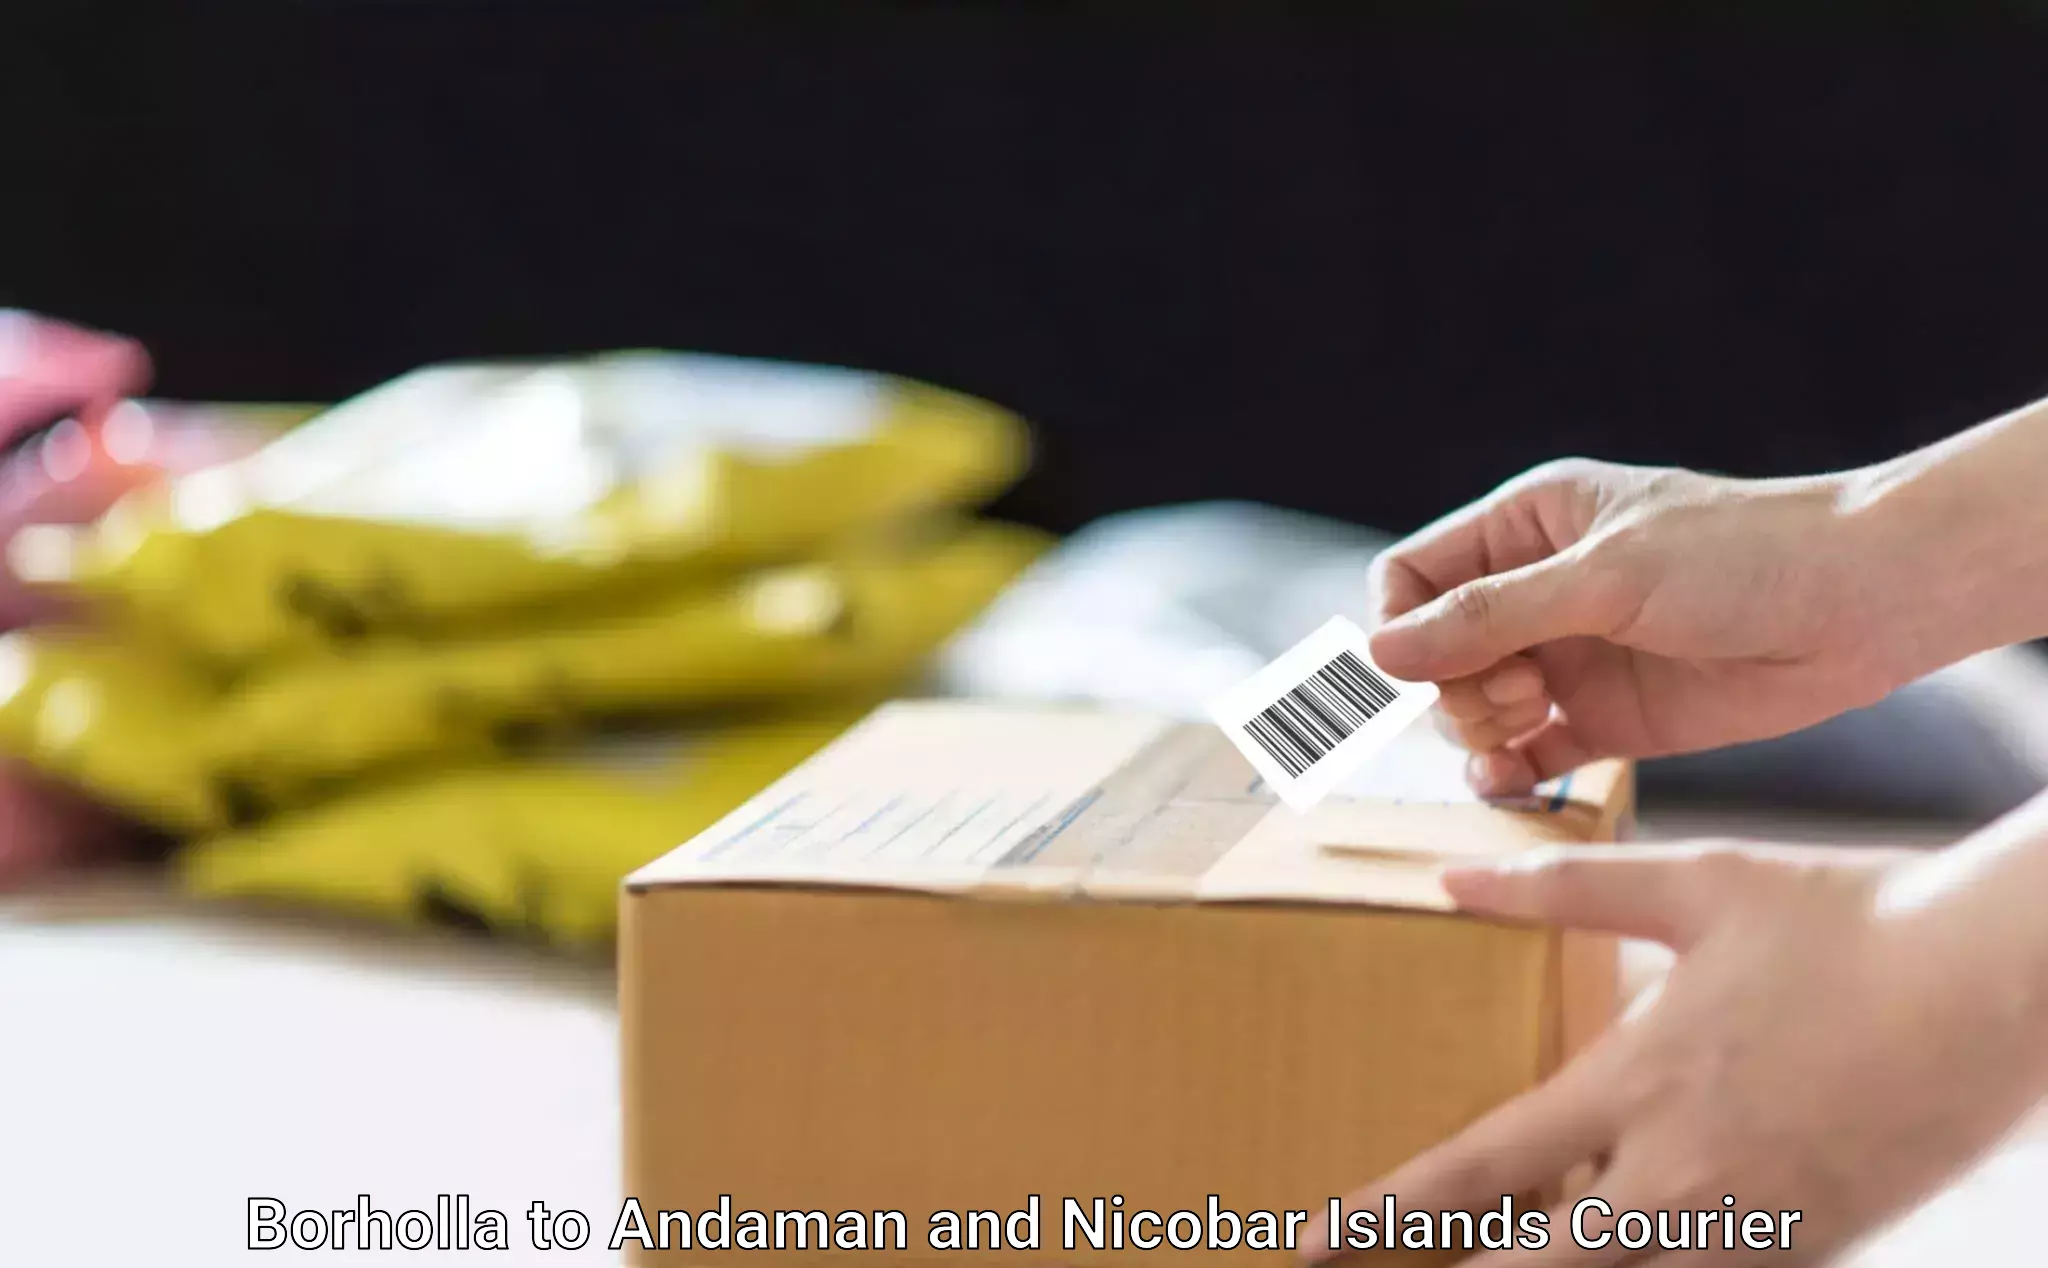 24-hour courier service Borholla to South Andaman